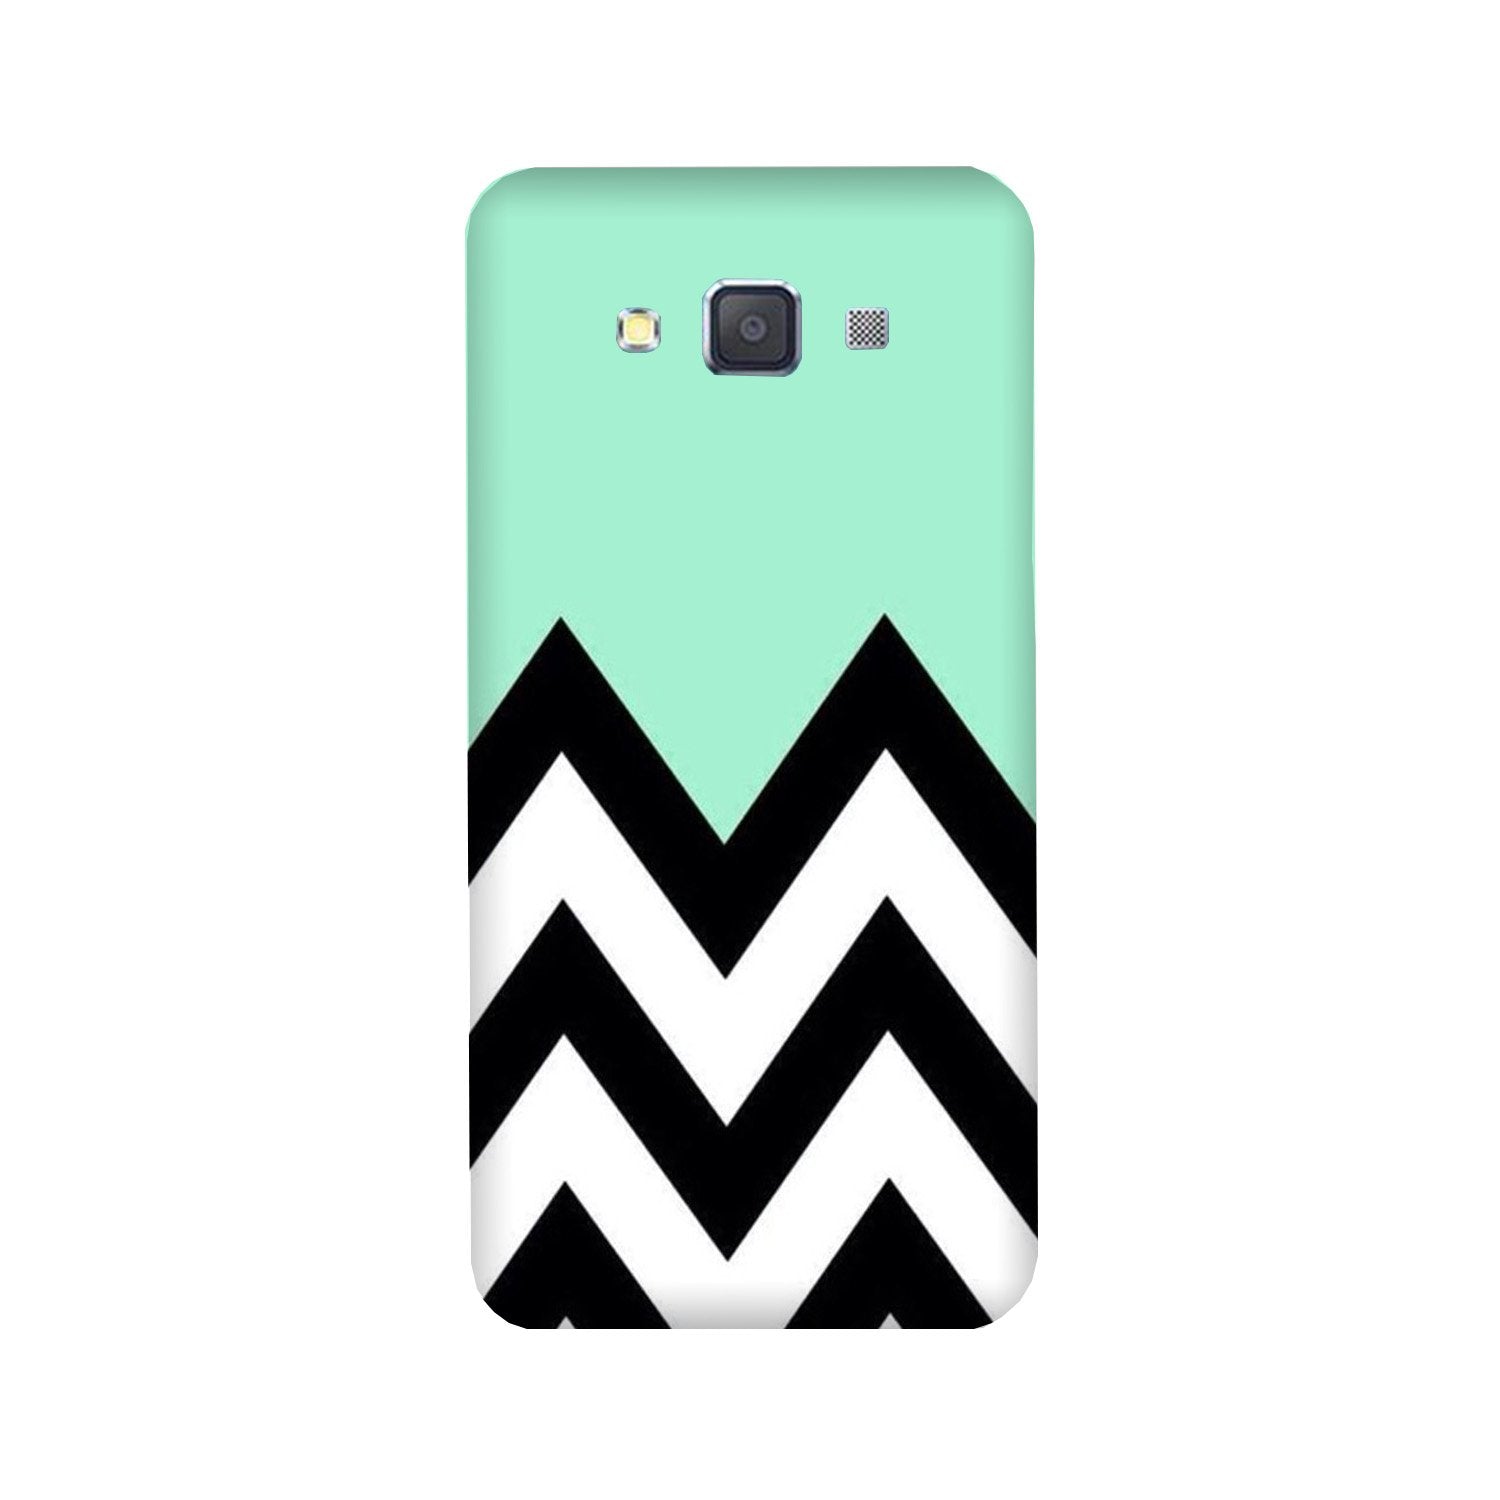 Pattern Case for Galaxy Grand 2